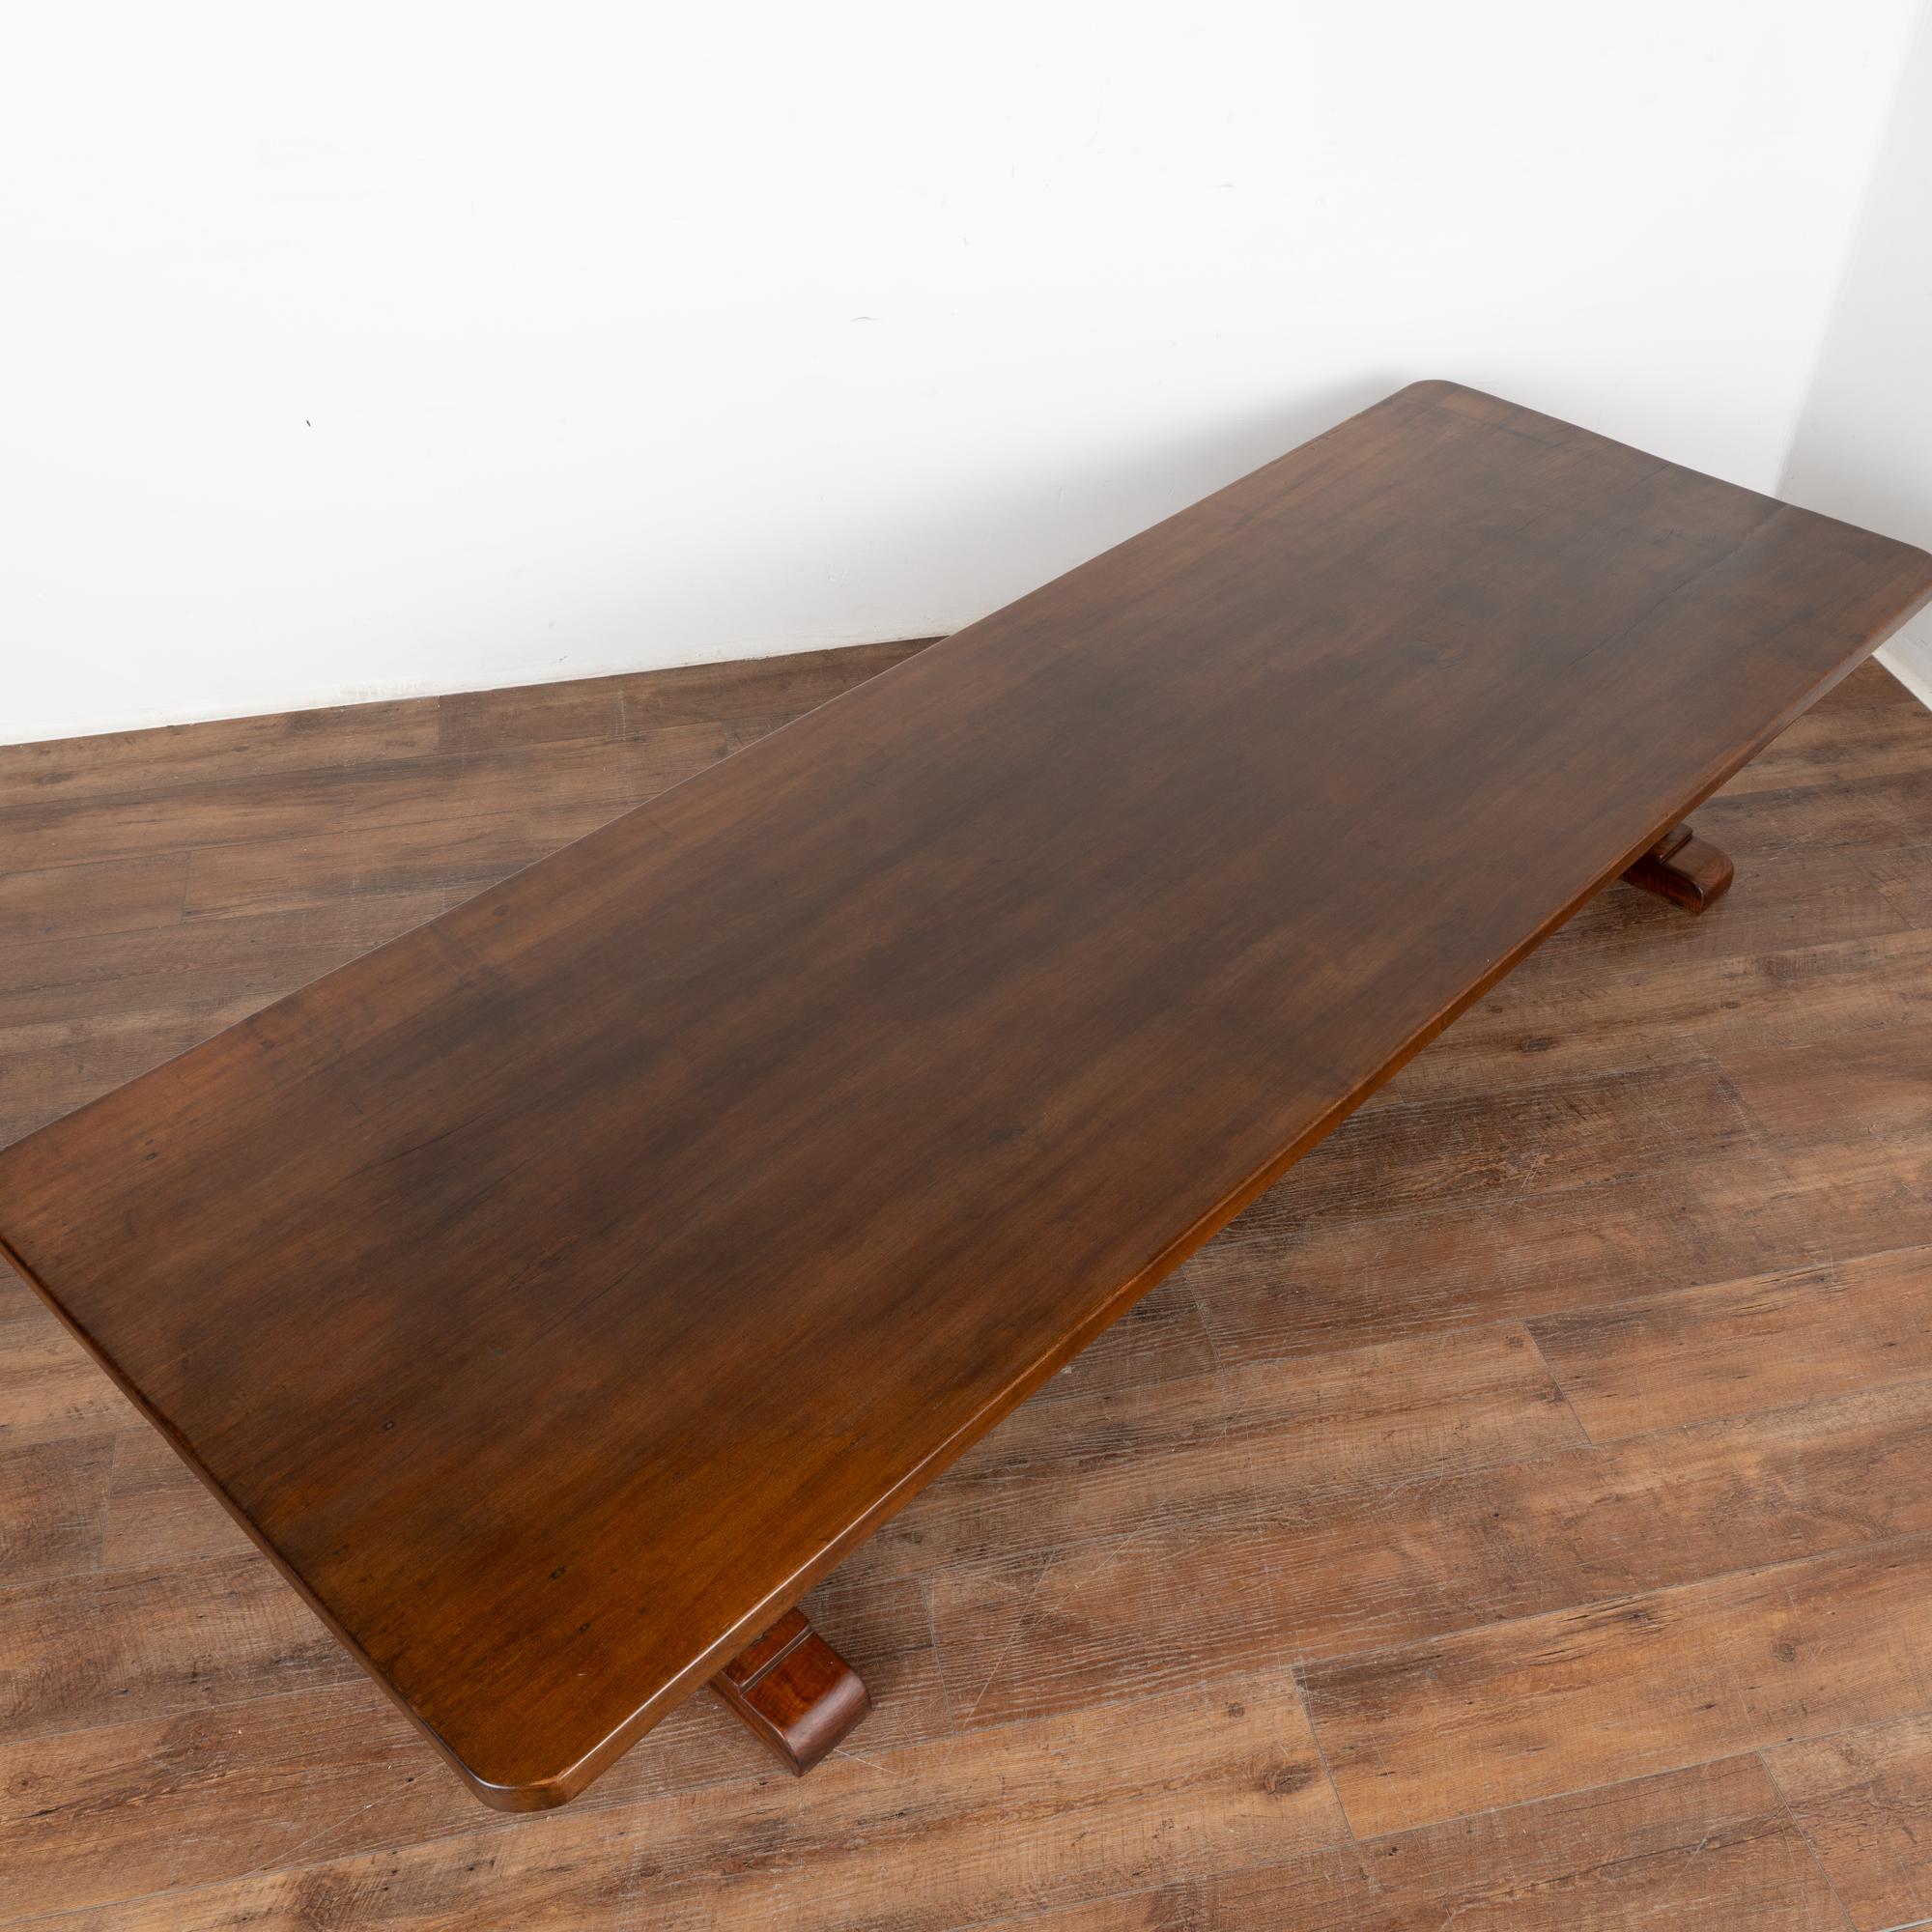 Chinese Long Elm Wood Coffee Table, circa 1880 For Sale